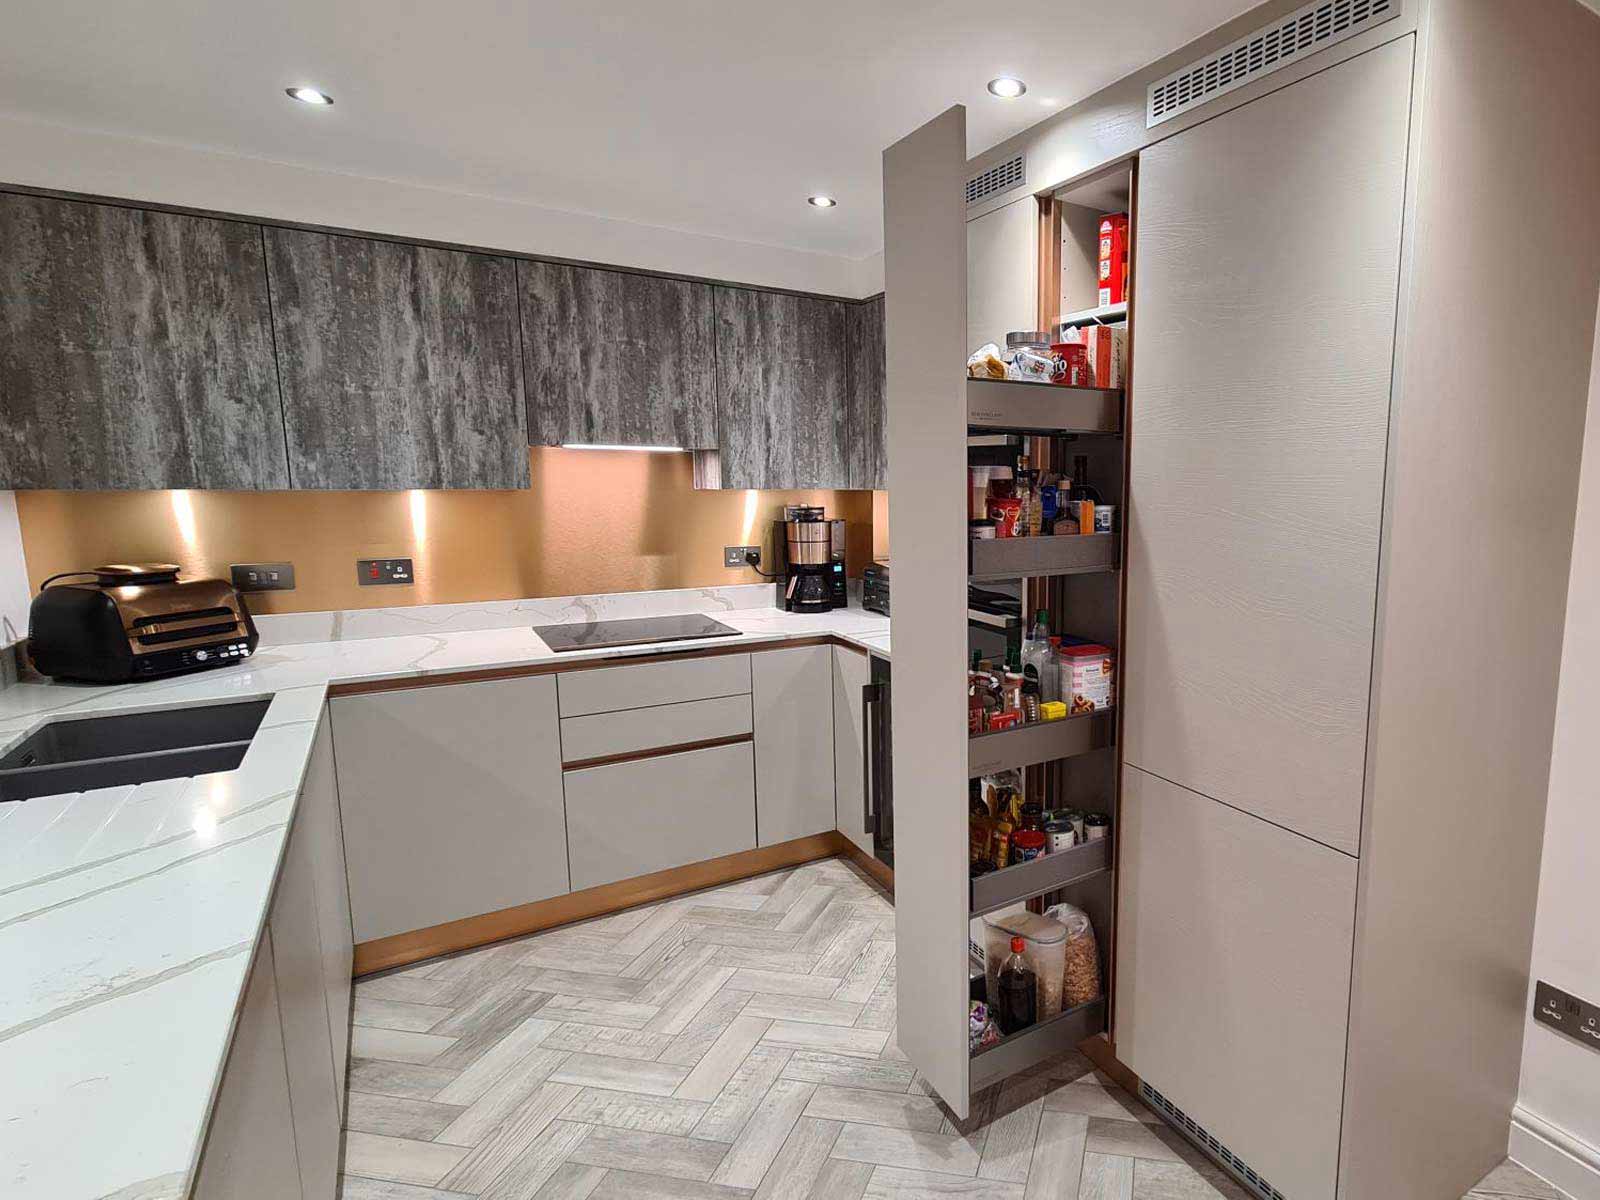 A light grey cashmere kitchen with wood-effect units and a gold splashback